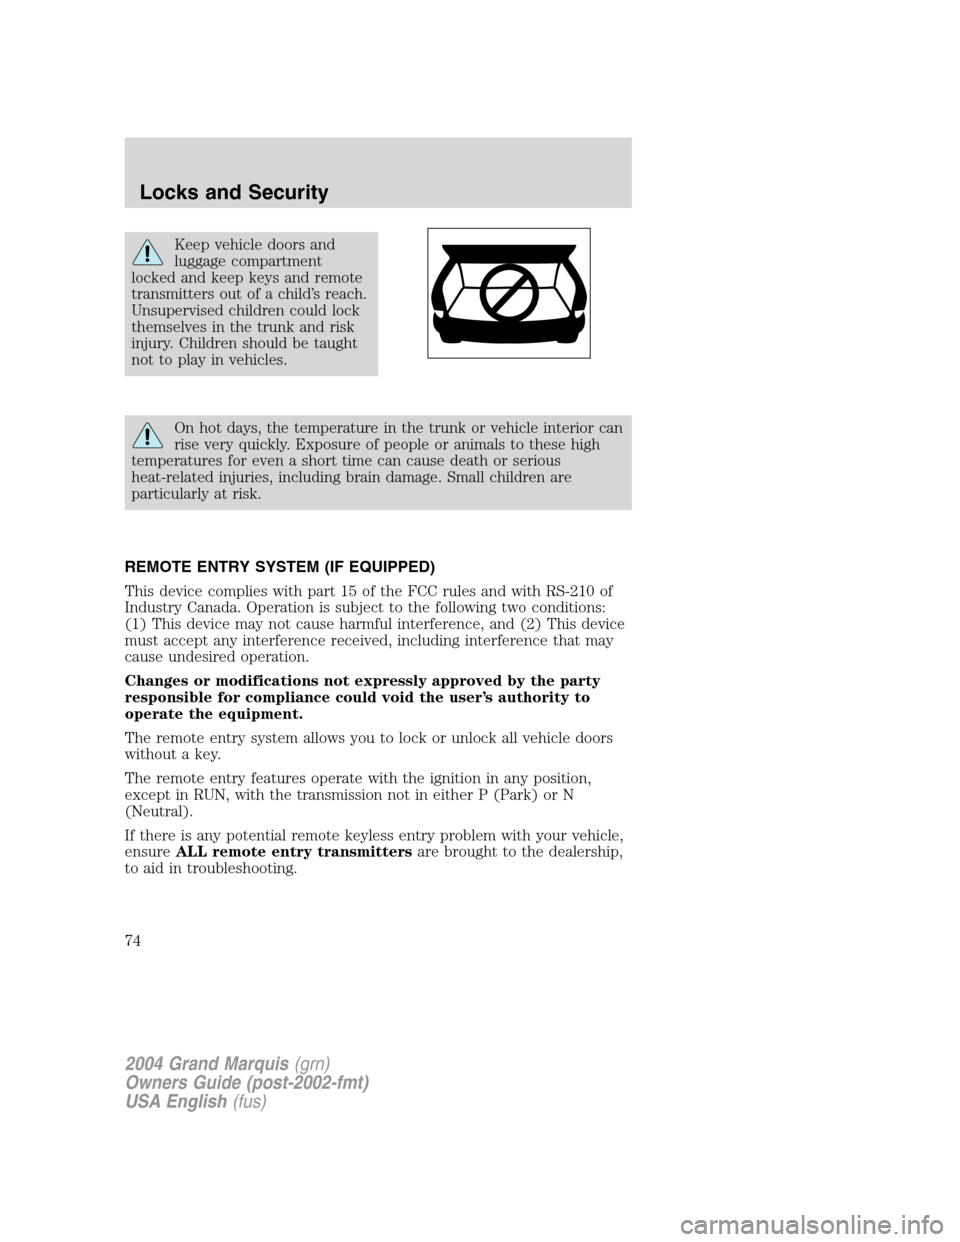 Mercury Grand Marquis 2004  s Manual PDF Keep vehicle doors and
luggage compartment
locked and keep keys and remote
transmitters out of a child’s reach.
Unsupervised children could lock
themselves in the trunk and risk
injury. Children sho